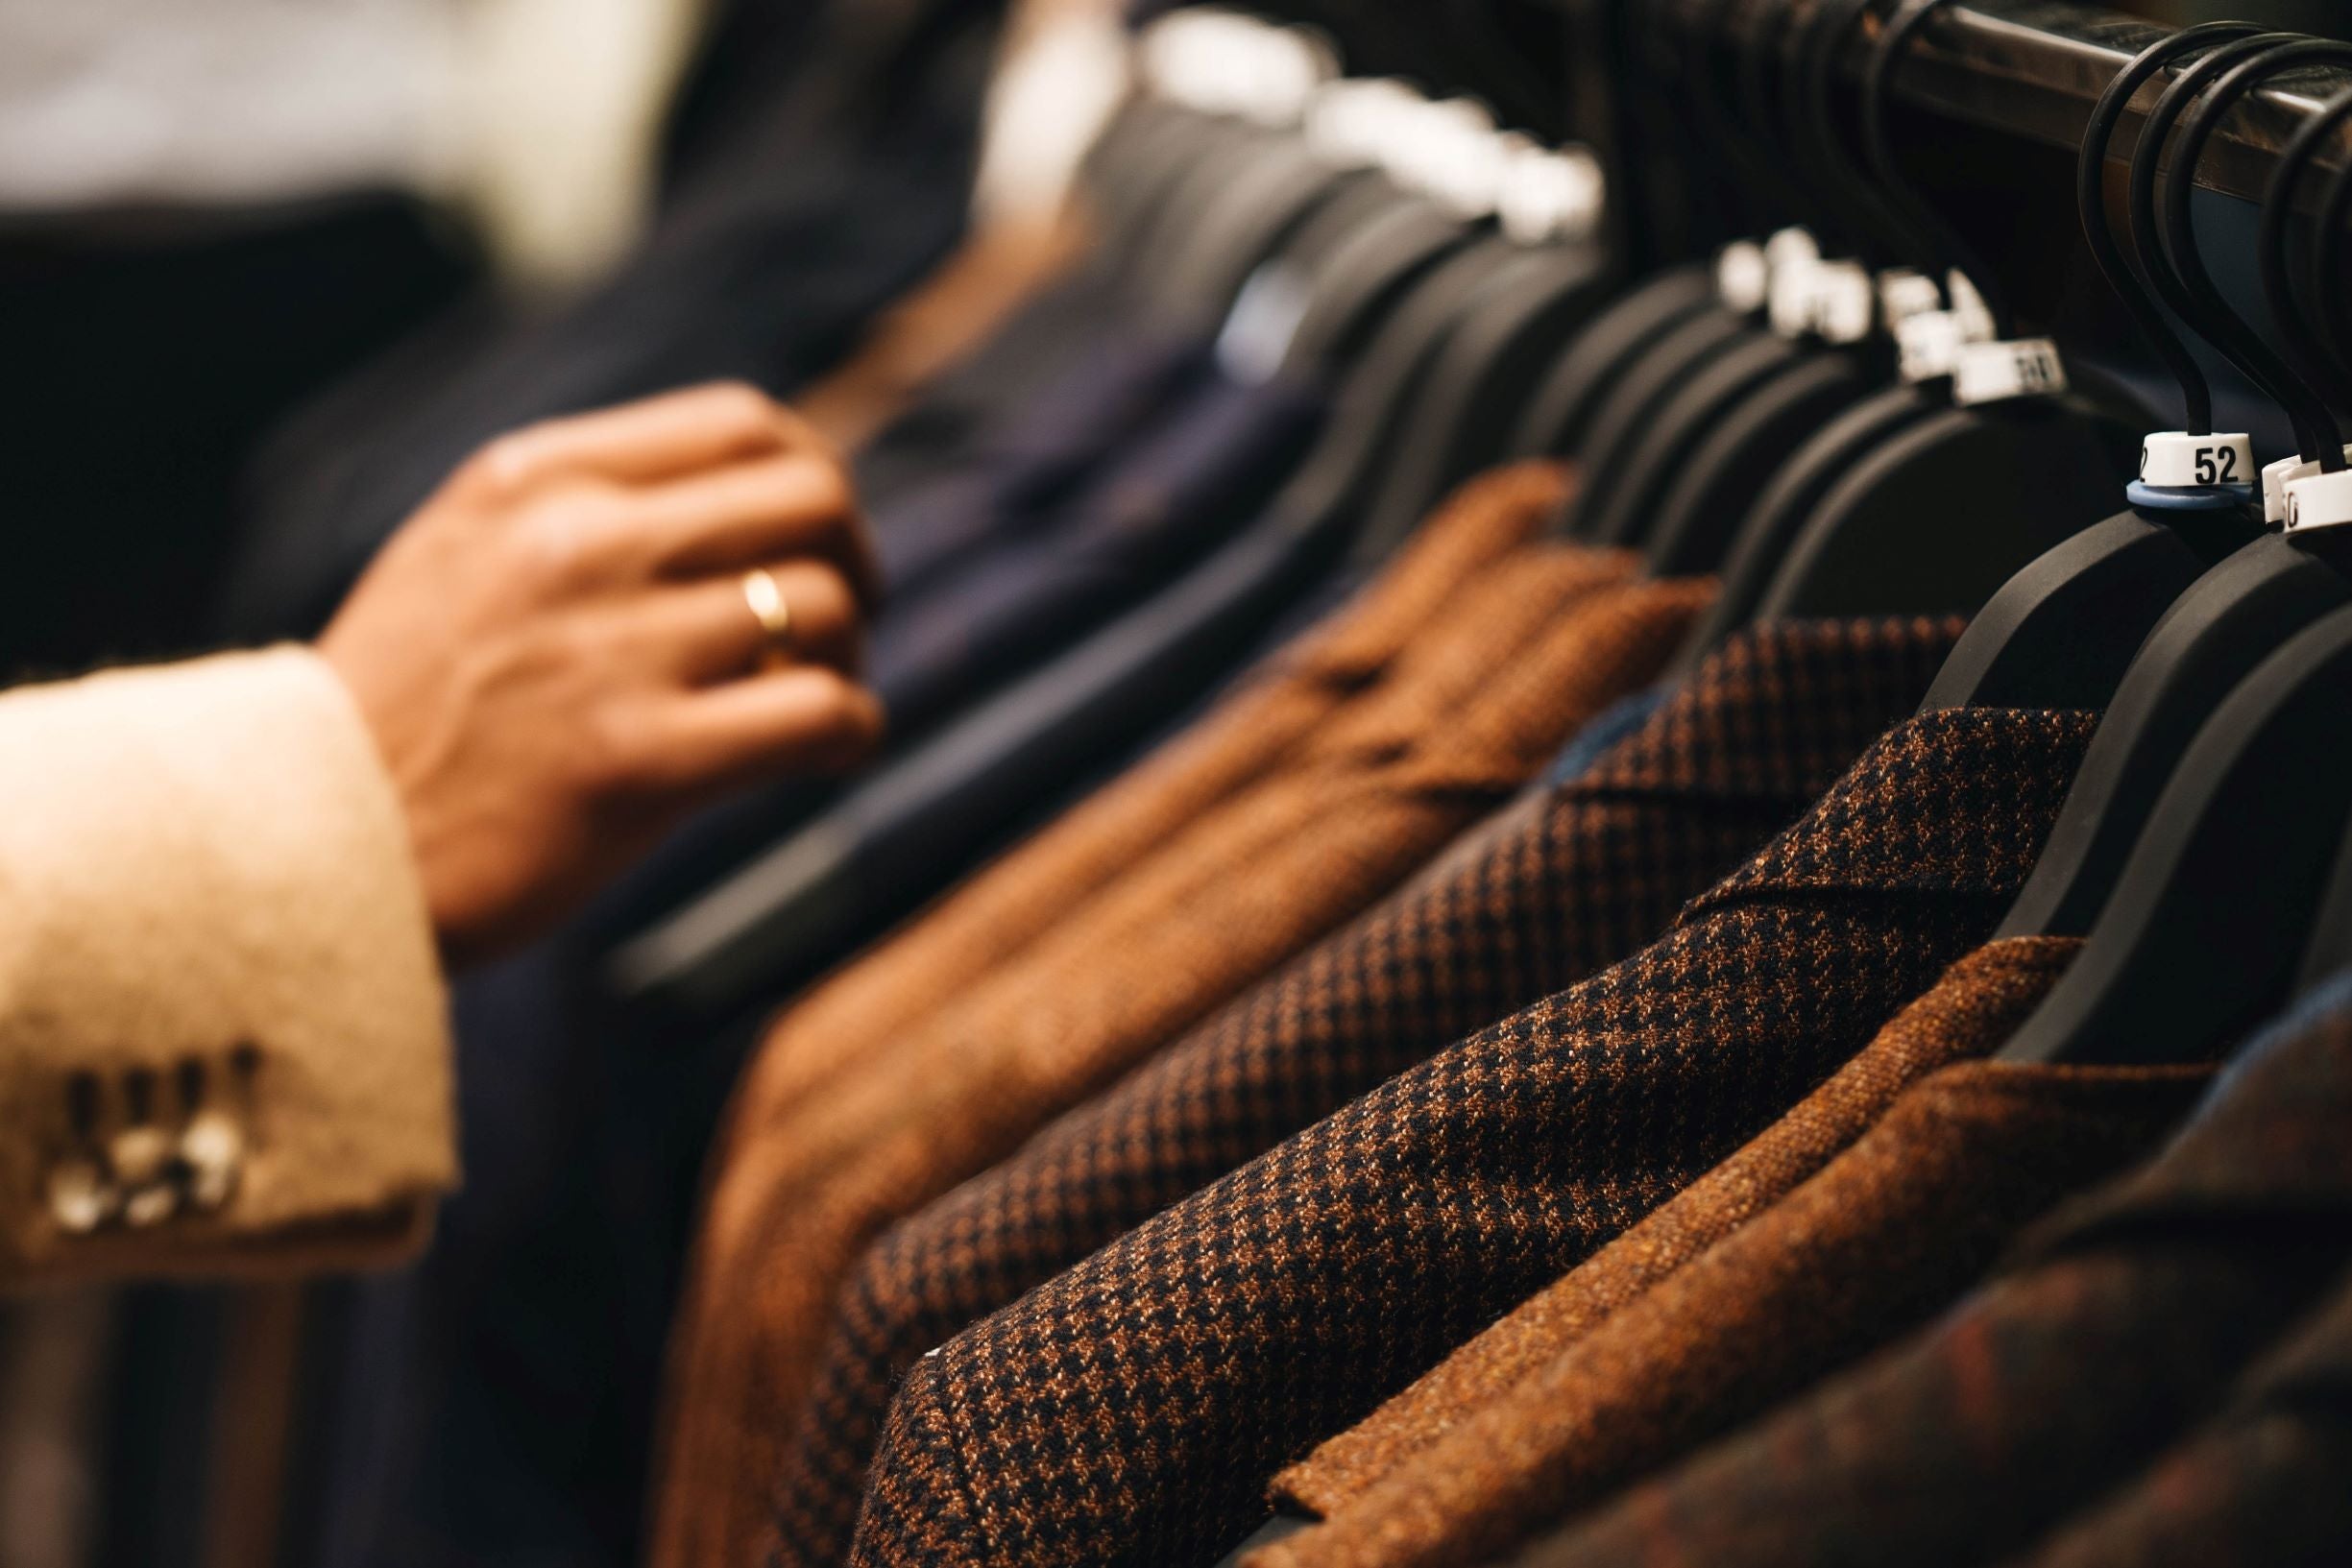 A man in a jacket looking at the men’s patterned blazers lined up on black, elegant hangers in a store